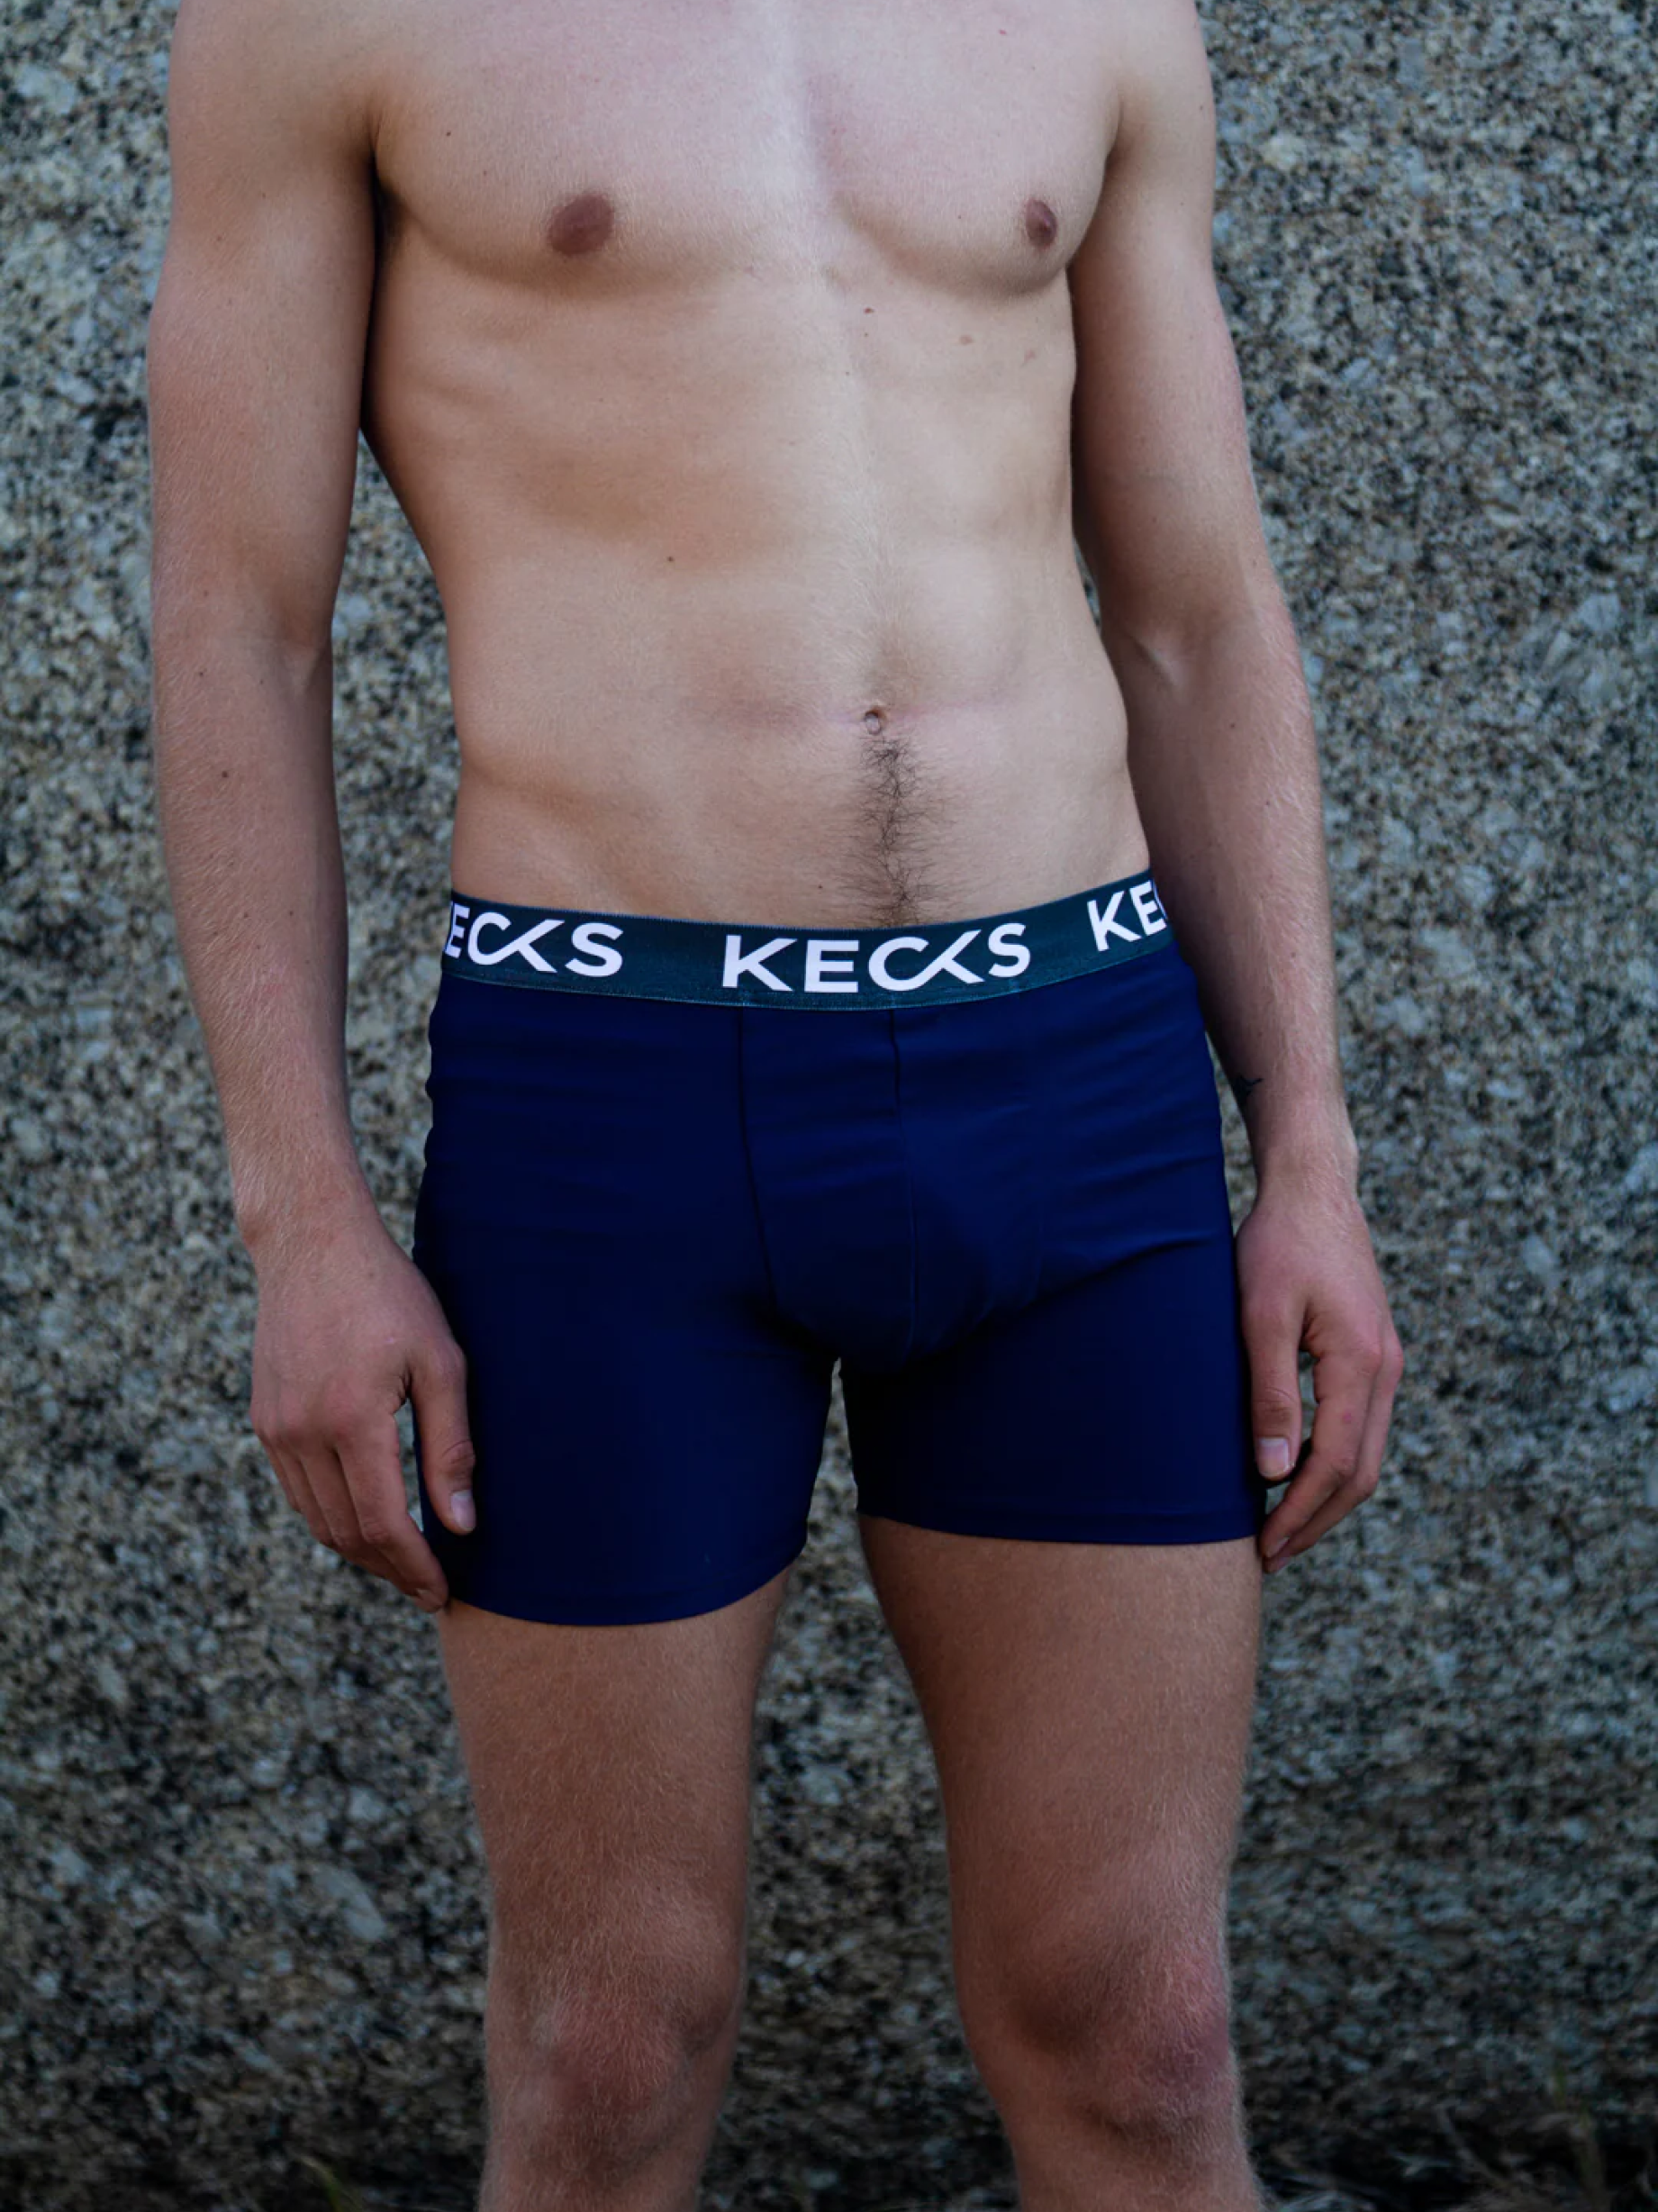 Kecks are underwear for sport, made with care in Cape Town, South